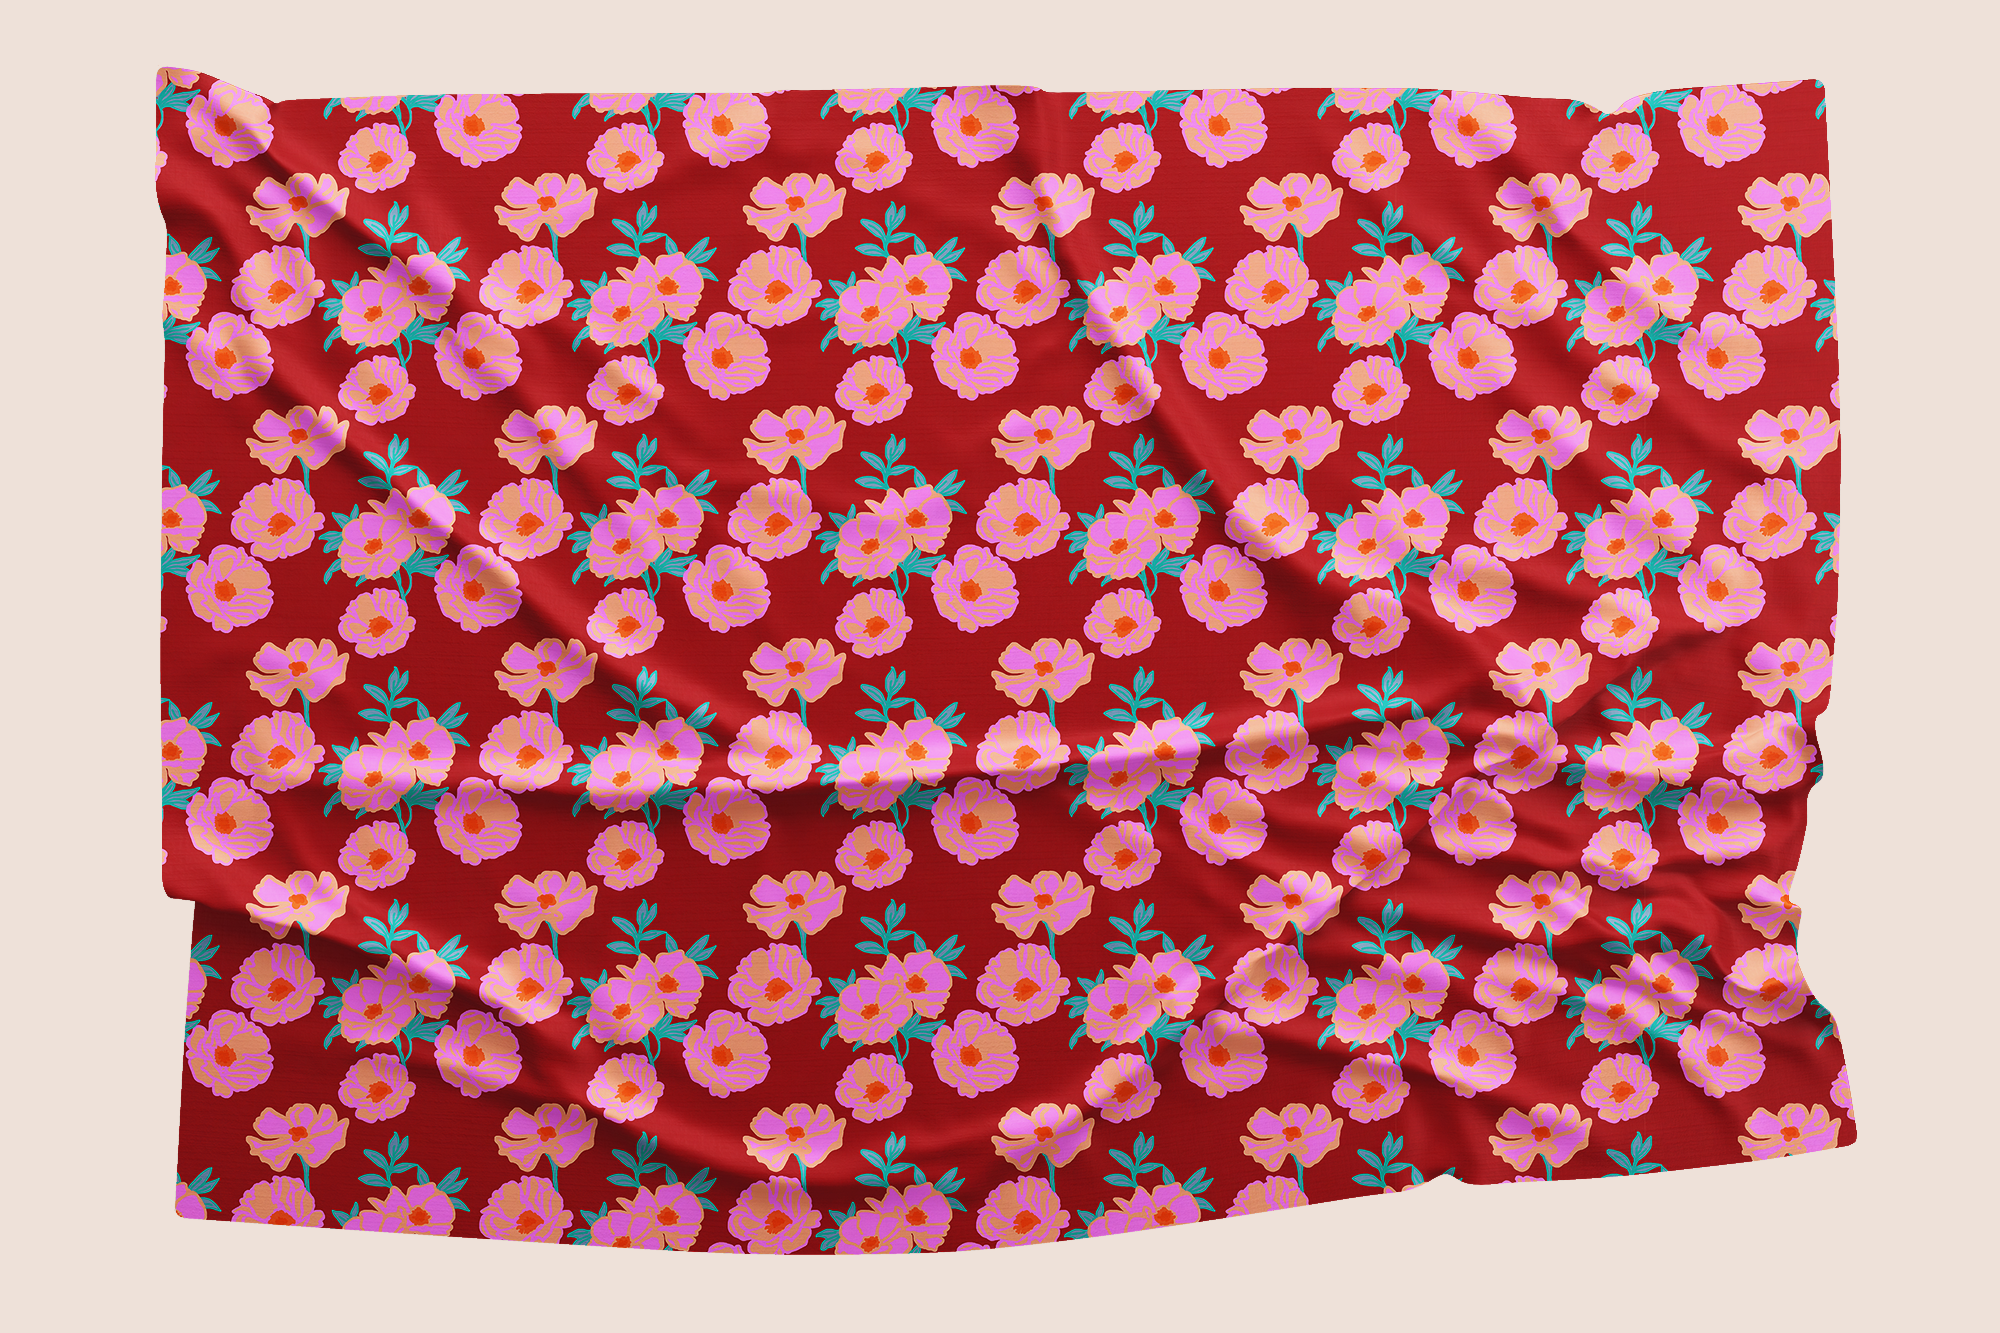 Floral dream digital trendy in red pattern design printed on sustainable fabric